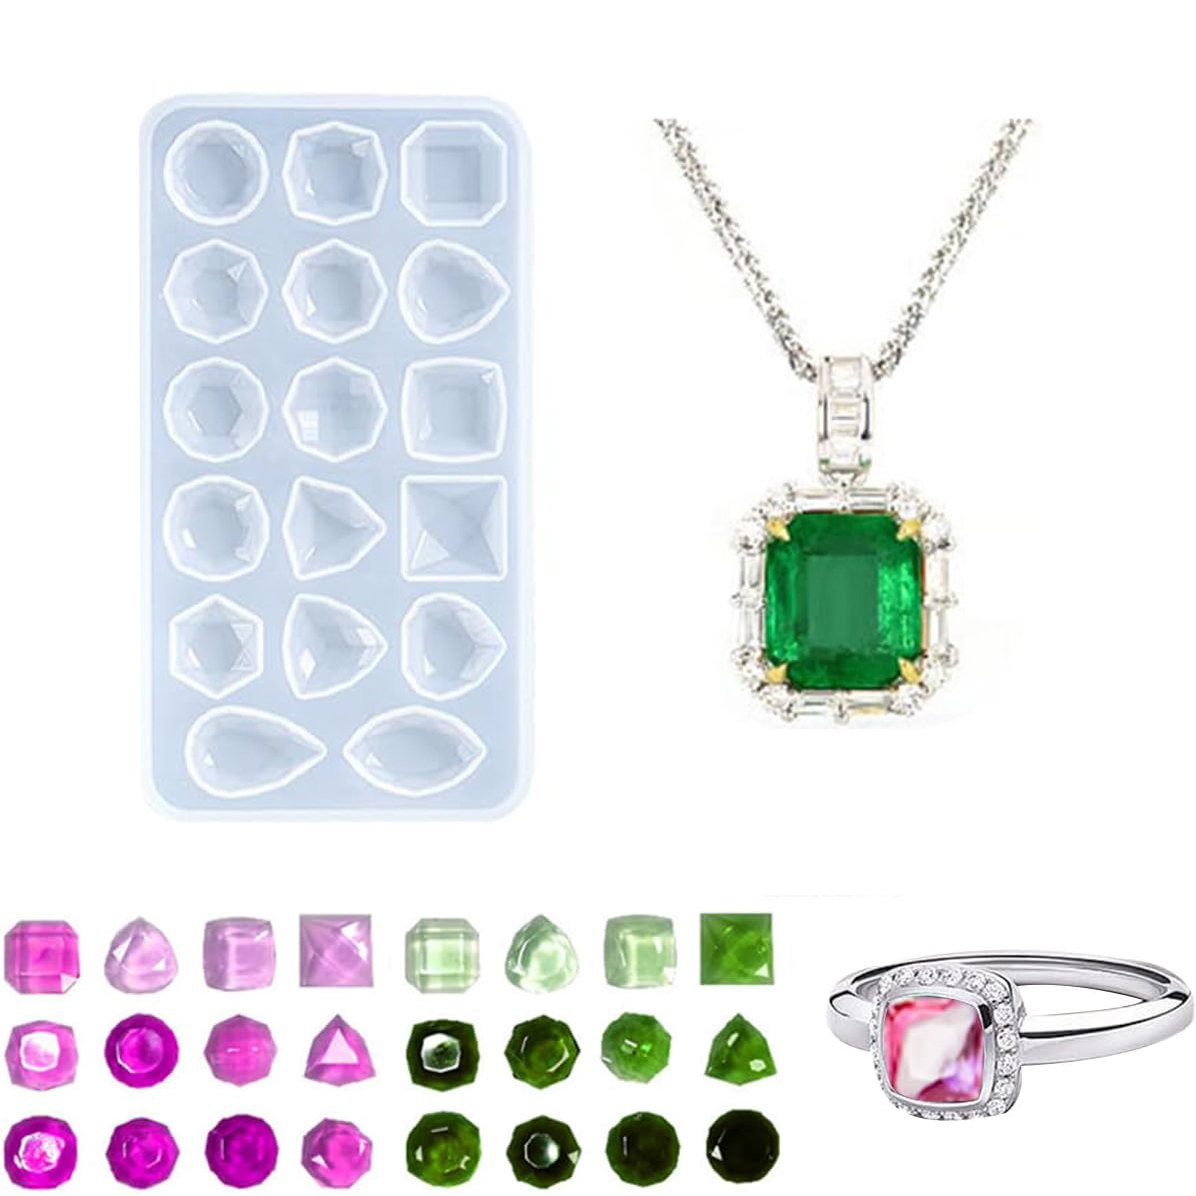 Hot Selling Gemstone Resin Molds Silicone,Resin Molds Jewelry,Resin Jewelry Casting Molds for Making Earrings